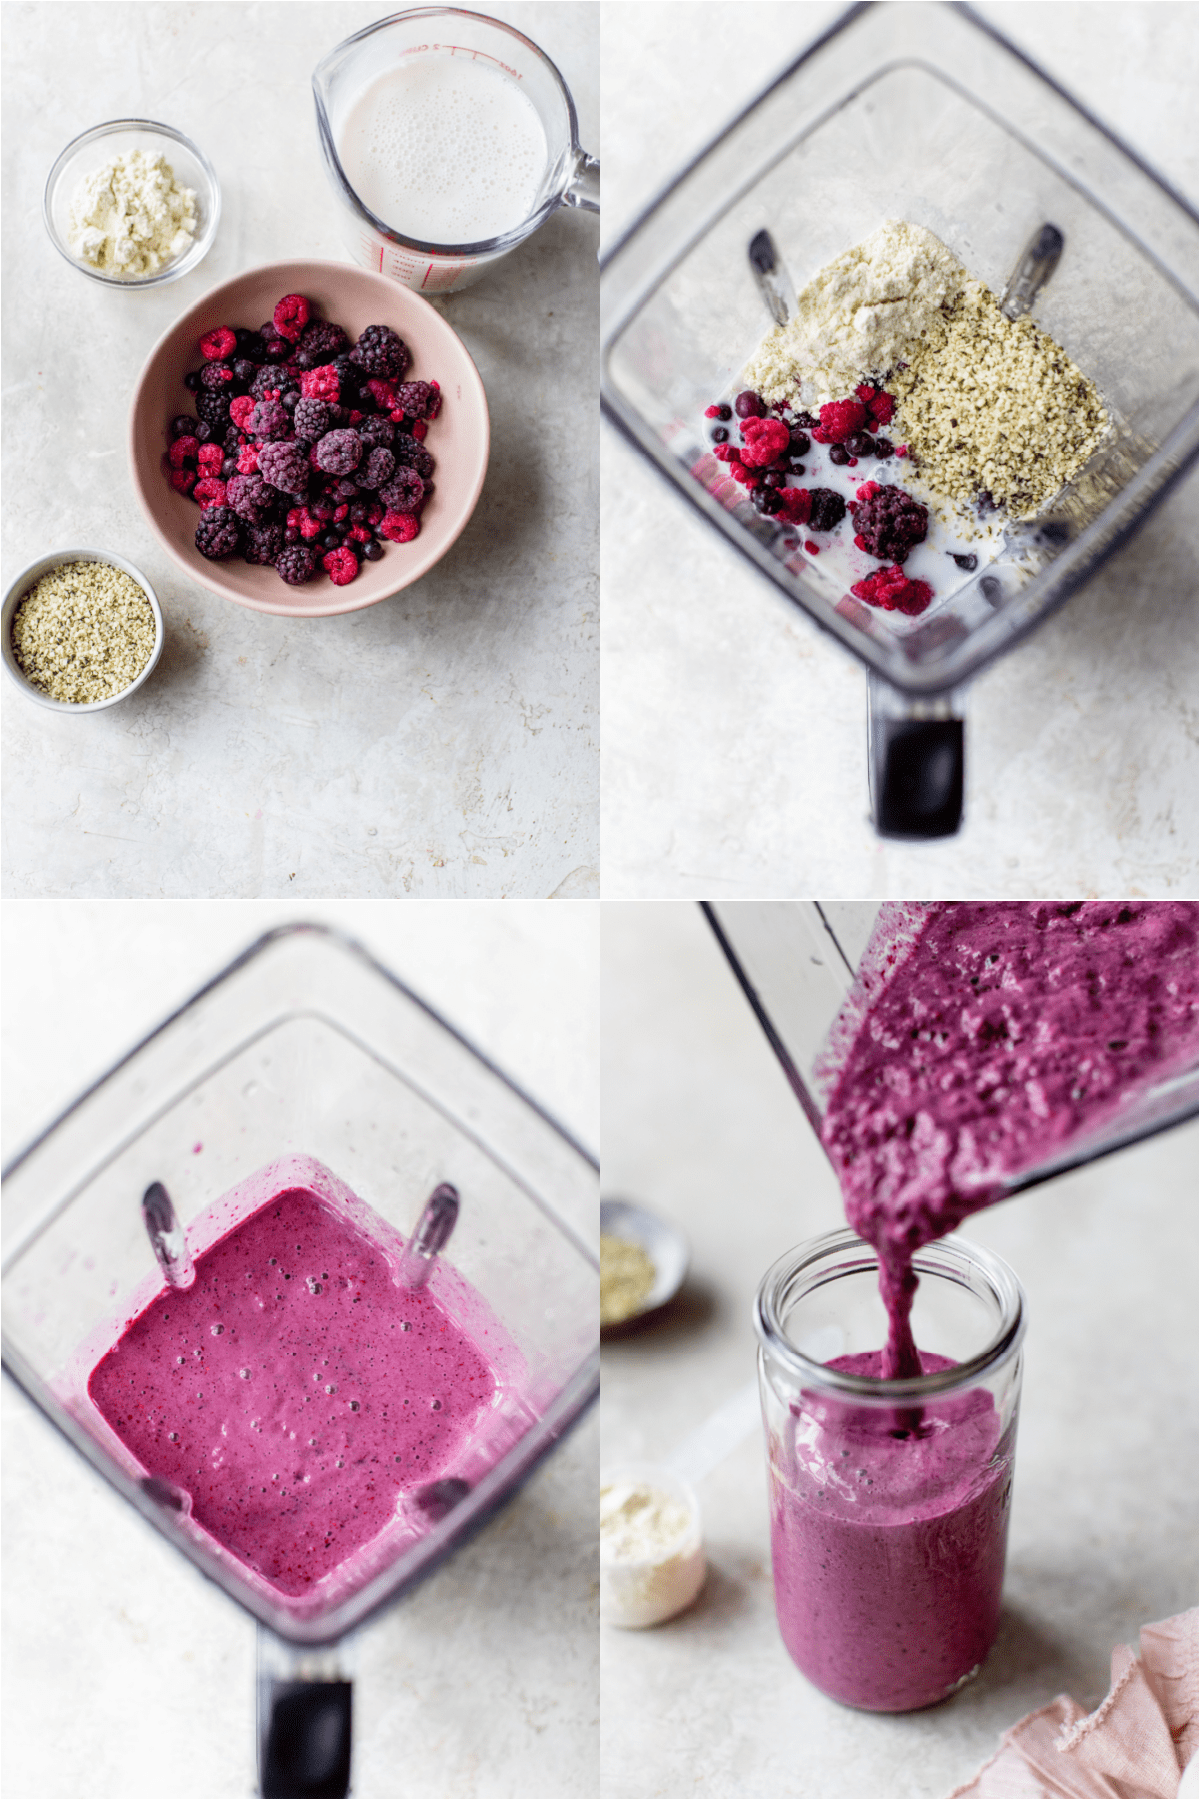 step-by-step photos to make mixed berry and hemp seed protein smoothie